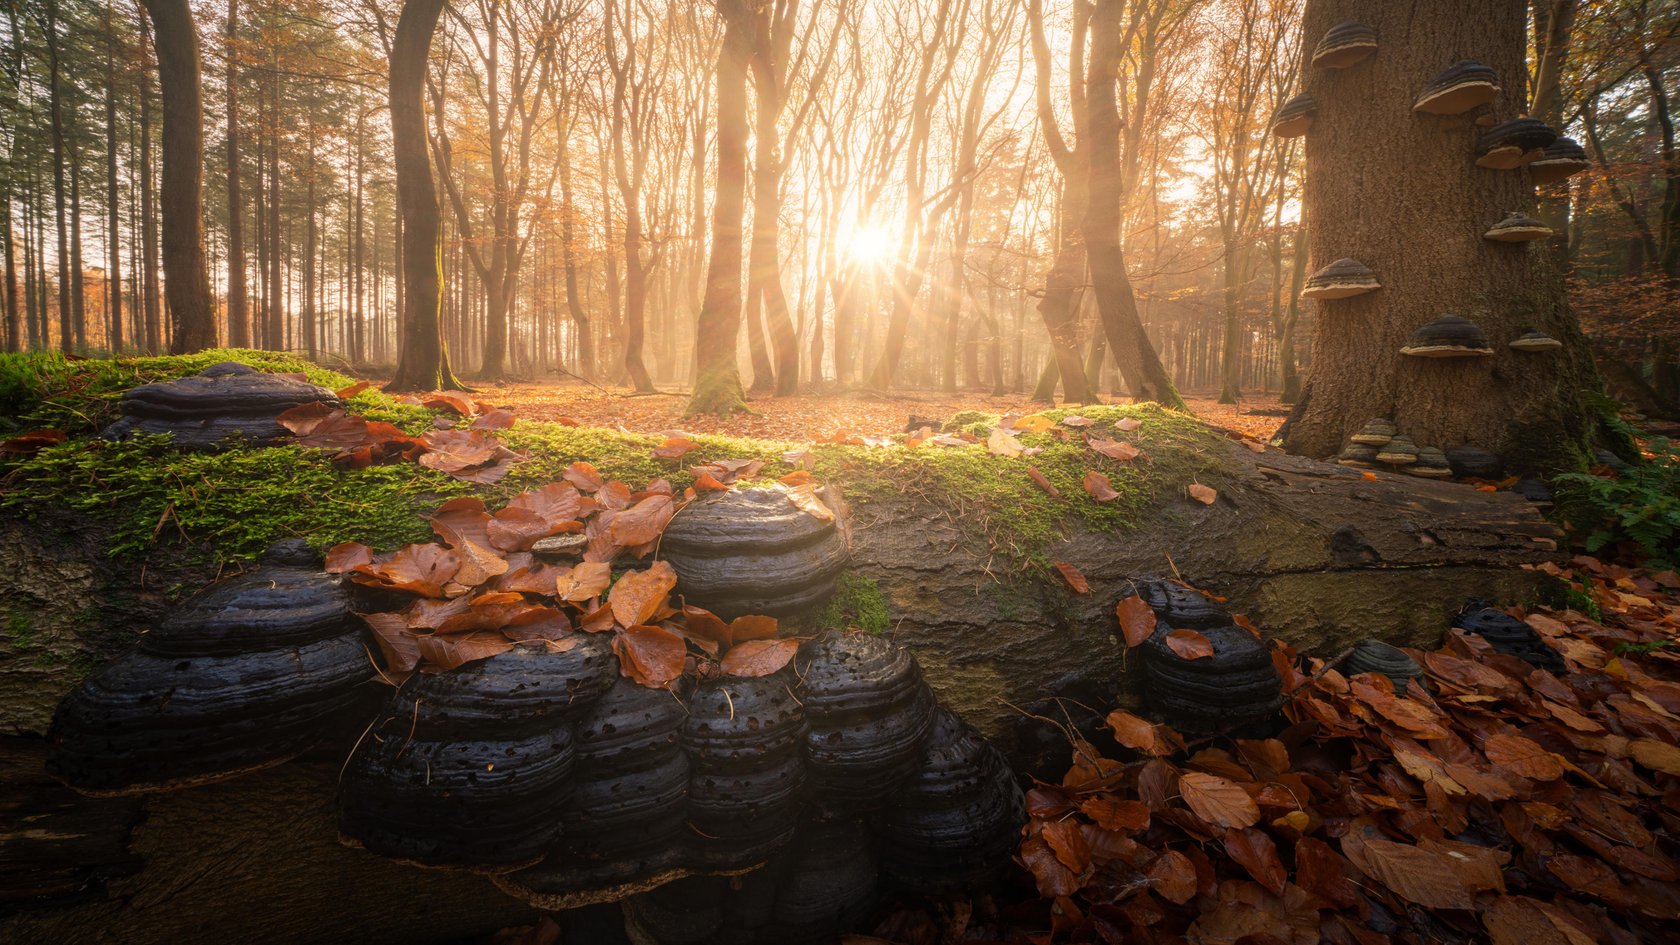 Magical Forests by Albert Dros. How to shoot and edit forest images | Skylum Blog(2)